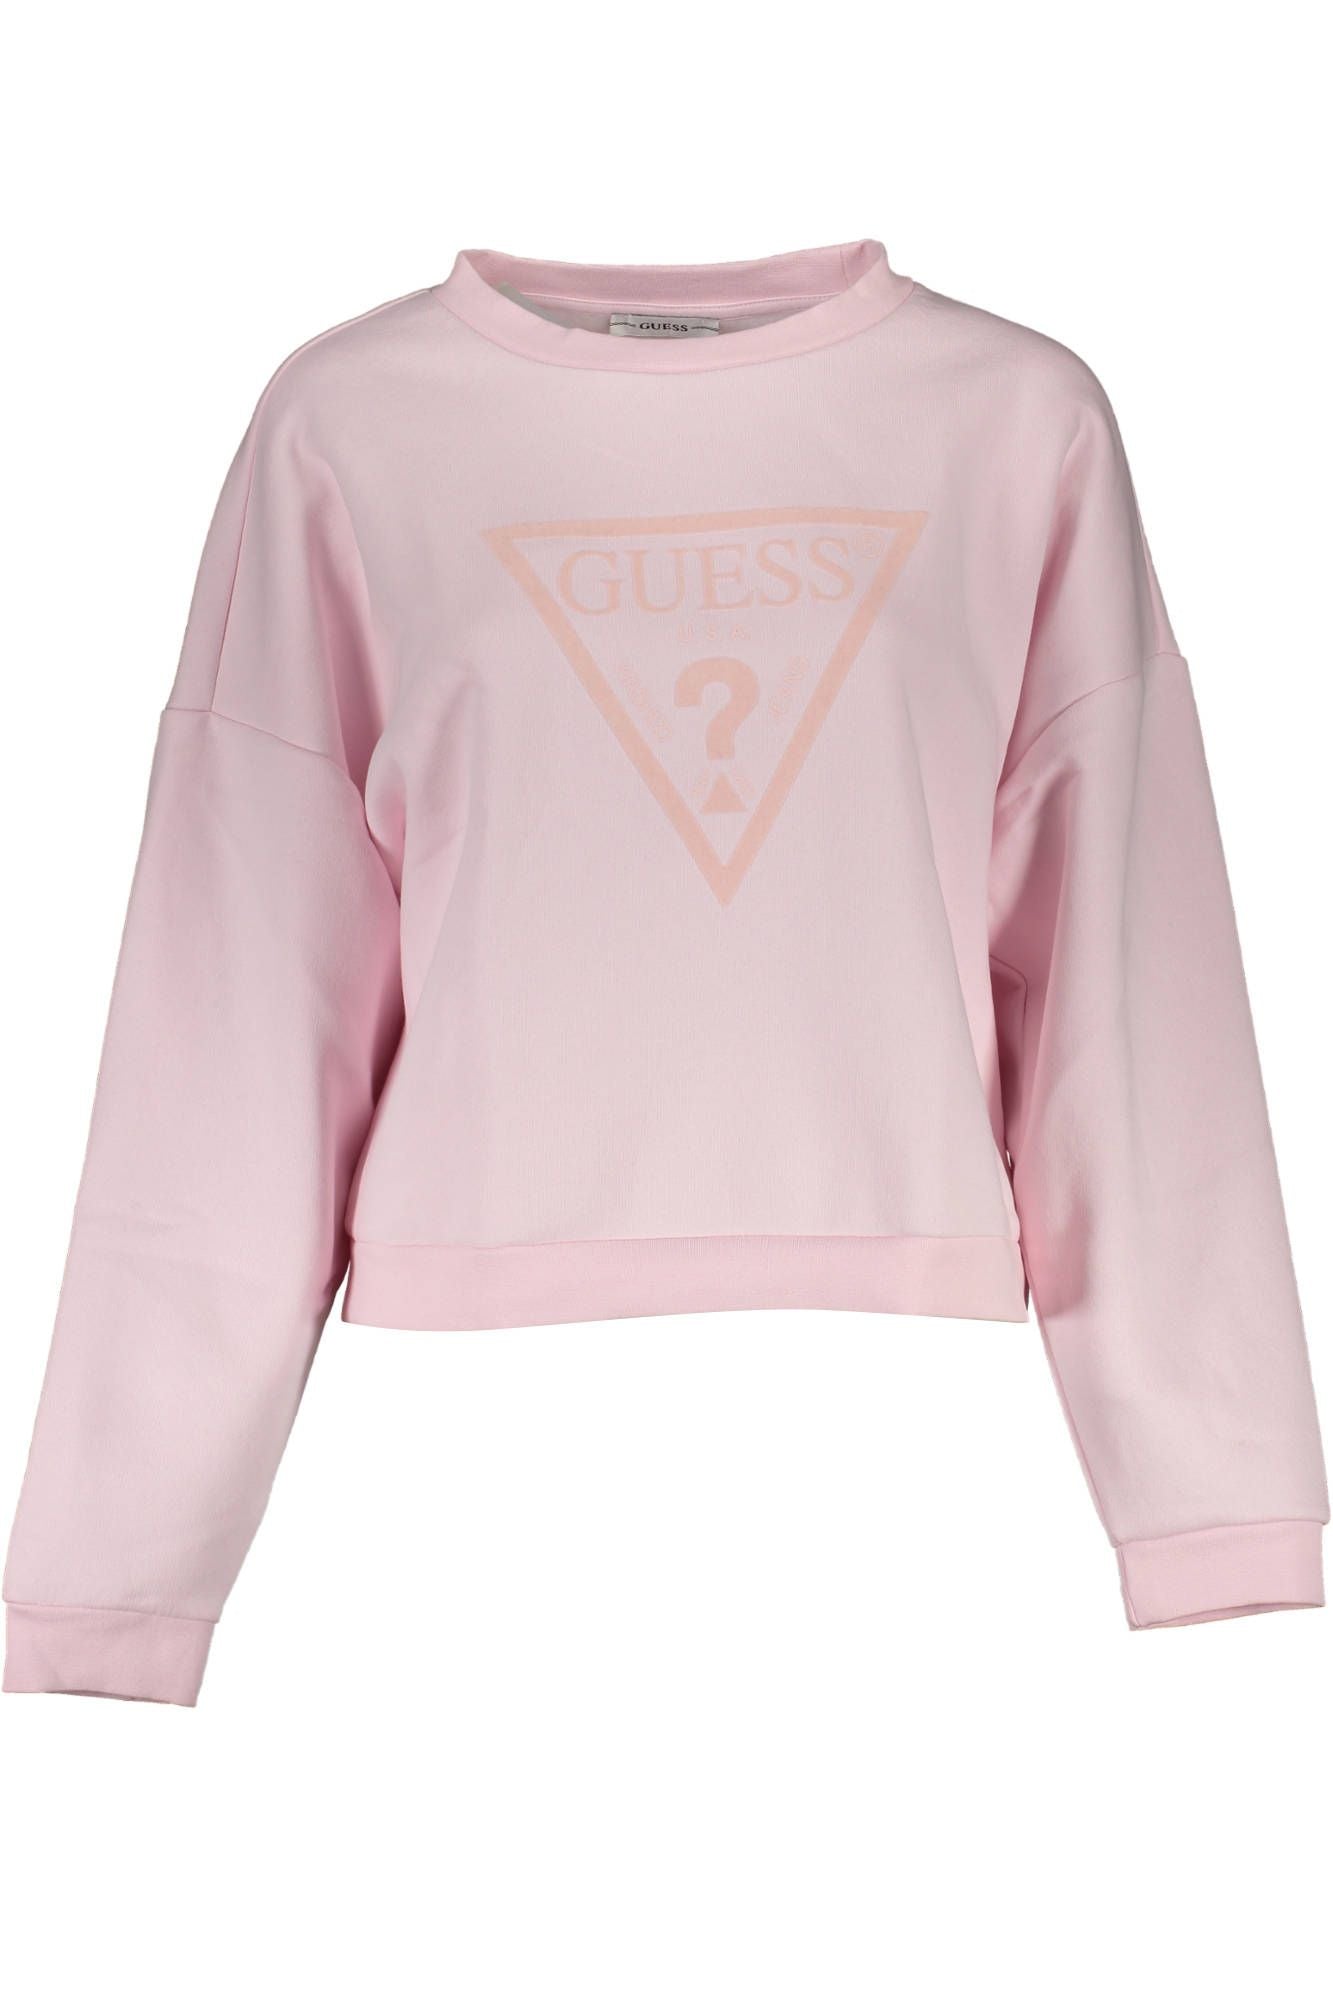 Guess Jeans Chic Pink Printed Organic Cotton Sweater